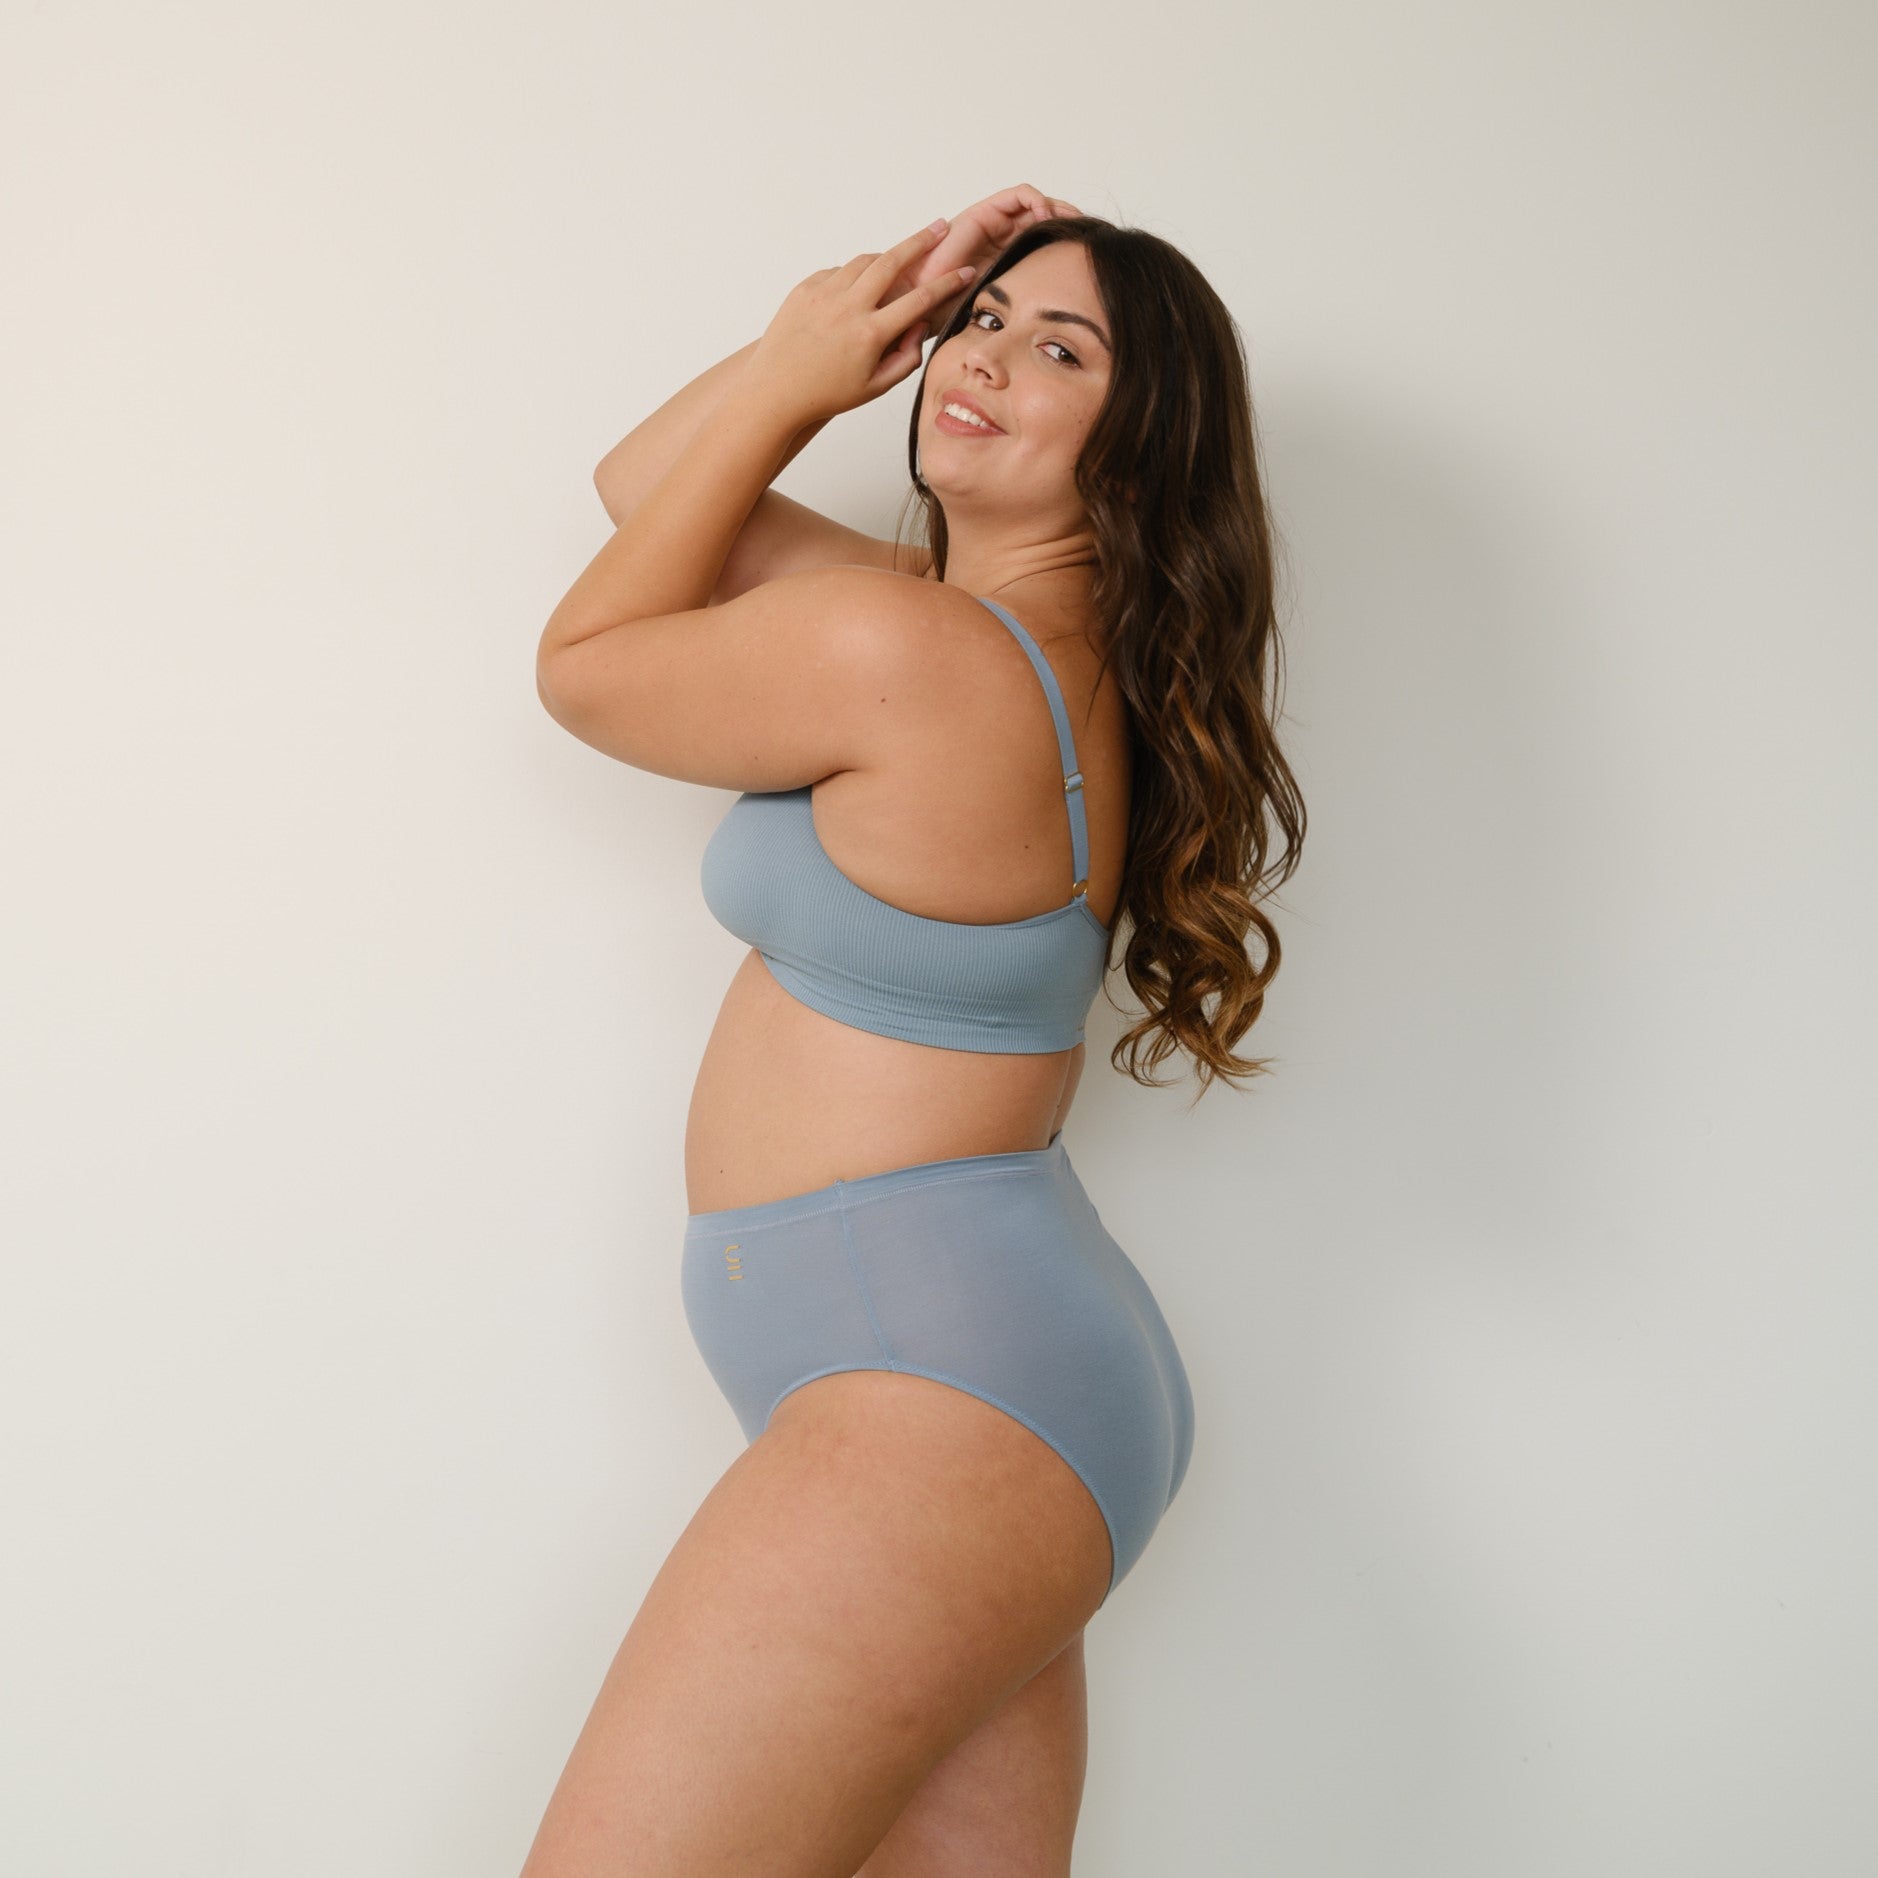 Sustainable mineral blue high waist brief by Underwear for Humanity: ethical, sustainable. sizes 6-26. light, breathable. Models wear high-waisted underwear. underwear sits high on the waist, full seat coverage. smooth under clothing. made from Tencel and recycled materials